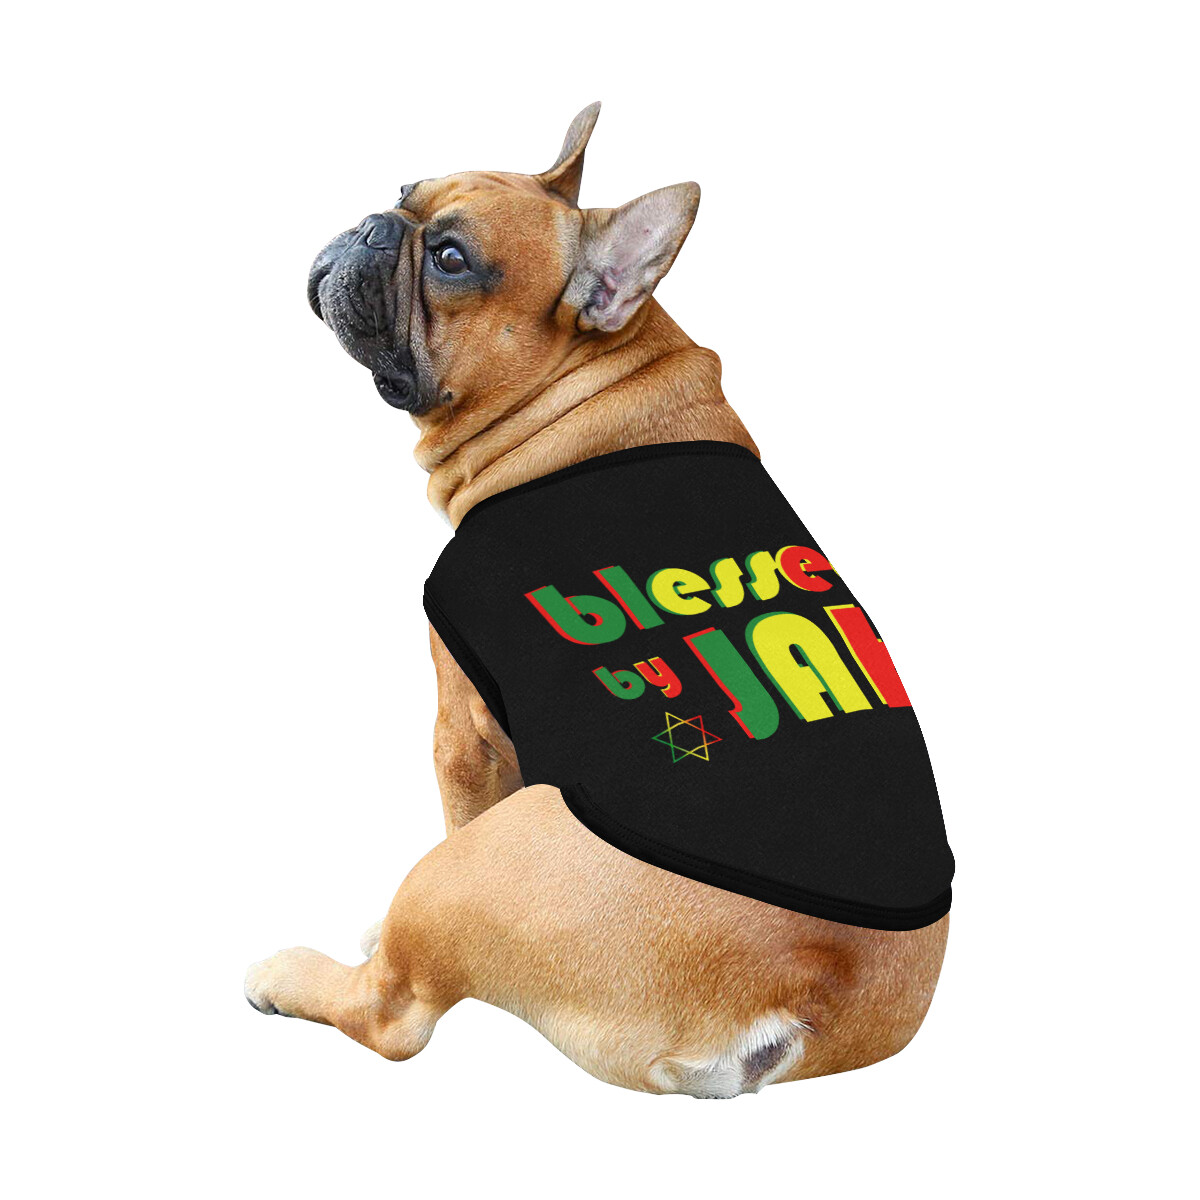 🐕 Blessed by Jah Rasta Dog Tank Top, Dog shirt, Dog clothes, Gifts, front back print, 7 sizes XS to 3XL, rasta flag, rasta dog shirt, rasta dog t-shirt, heart shape, black